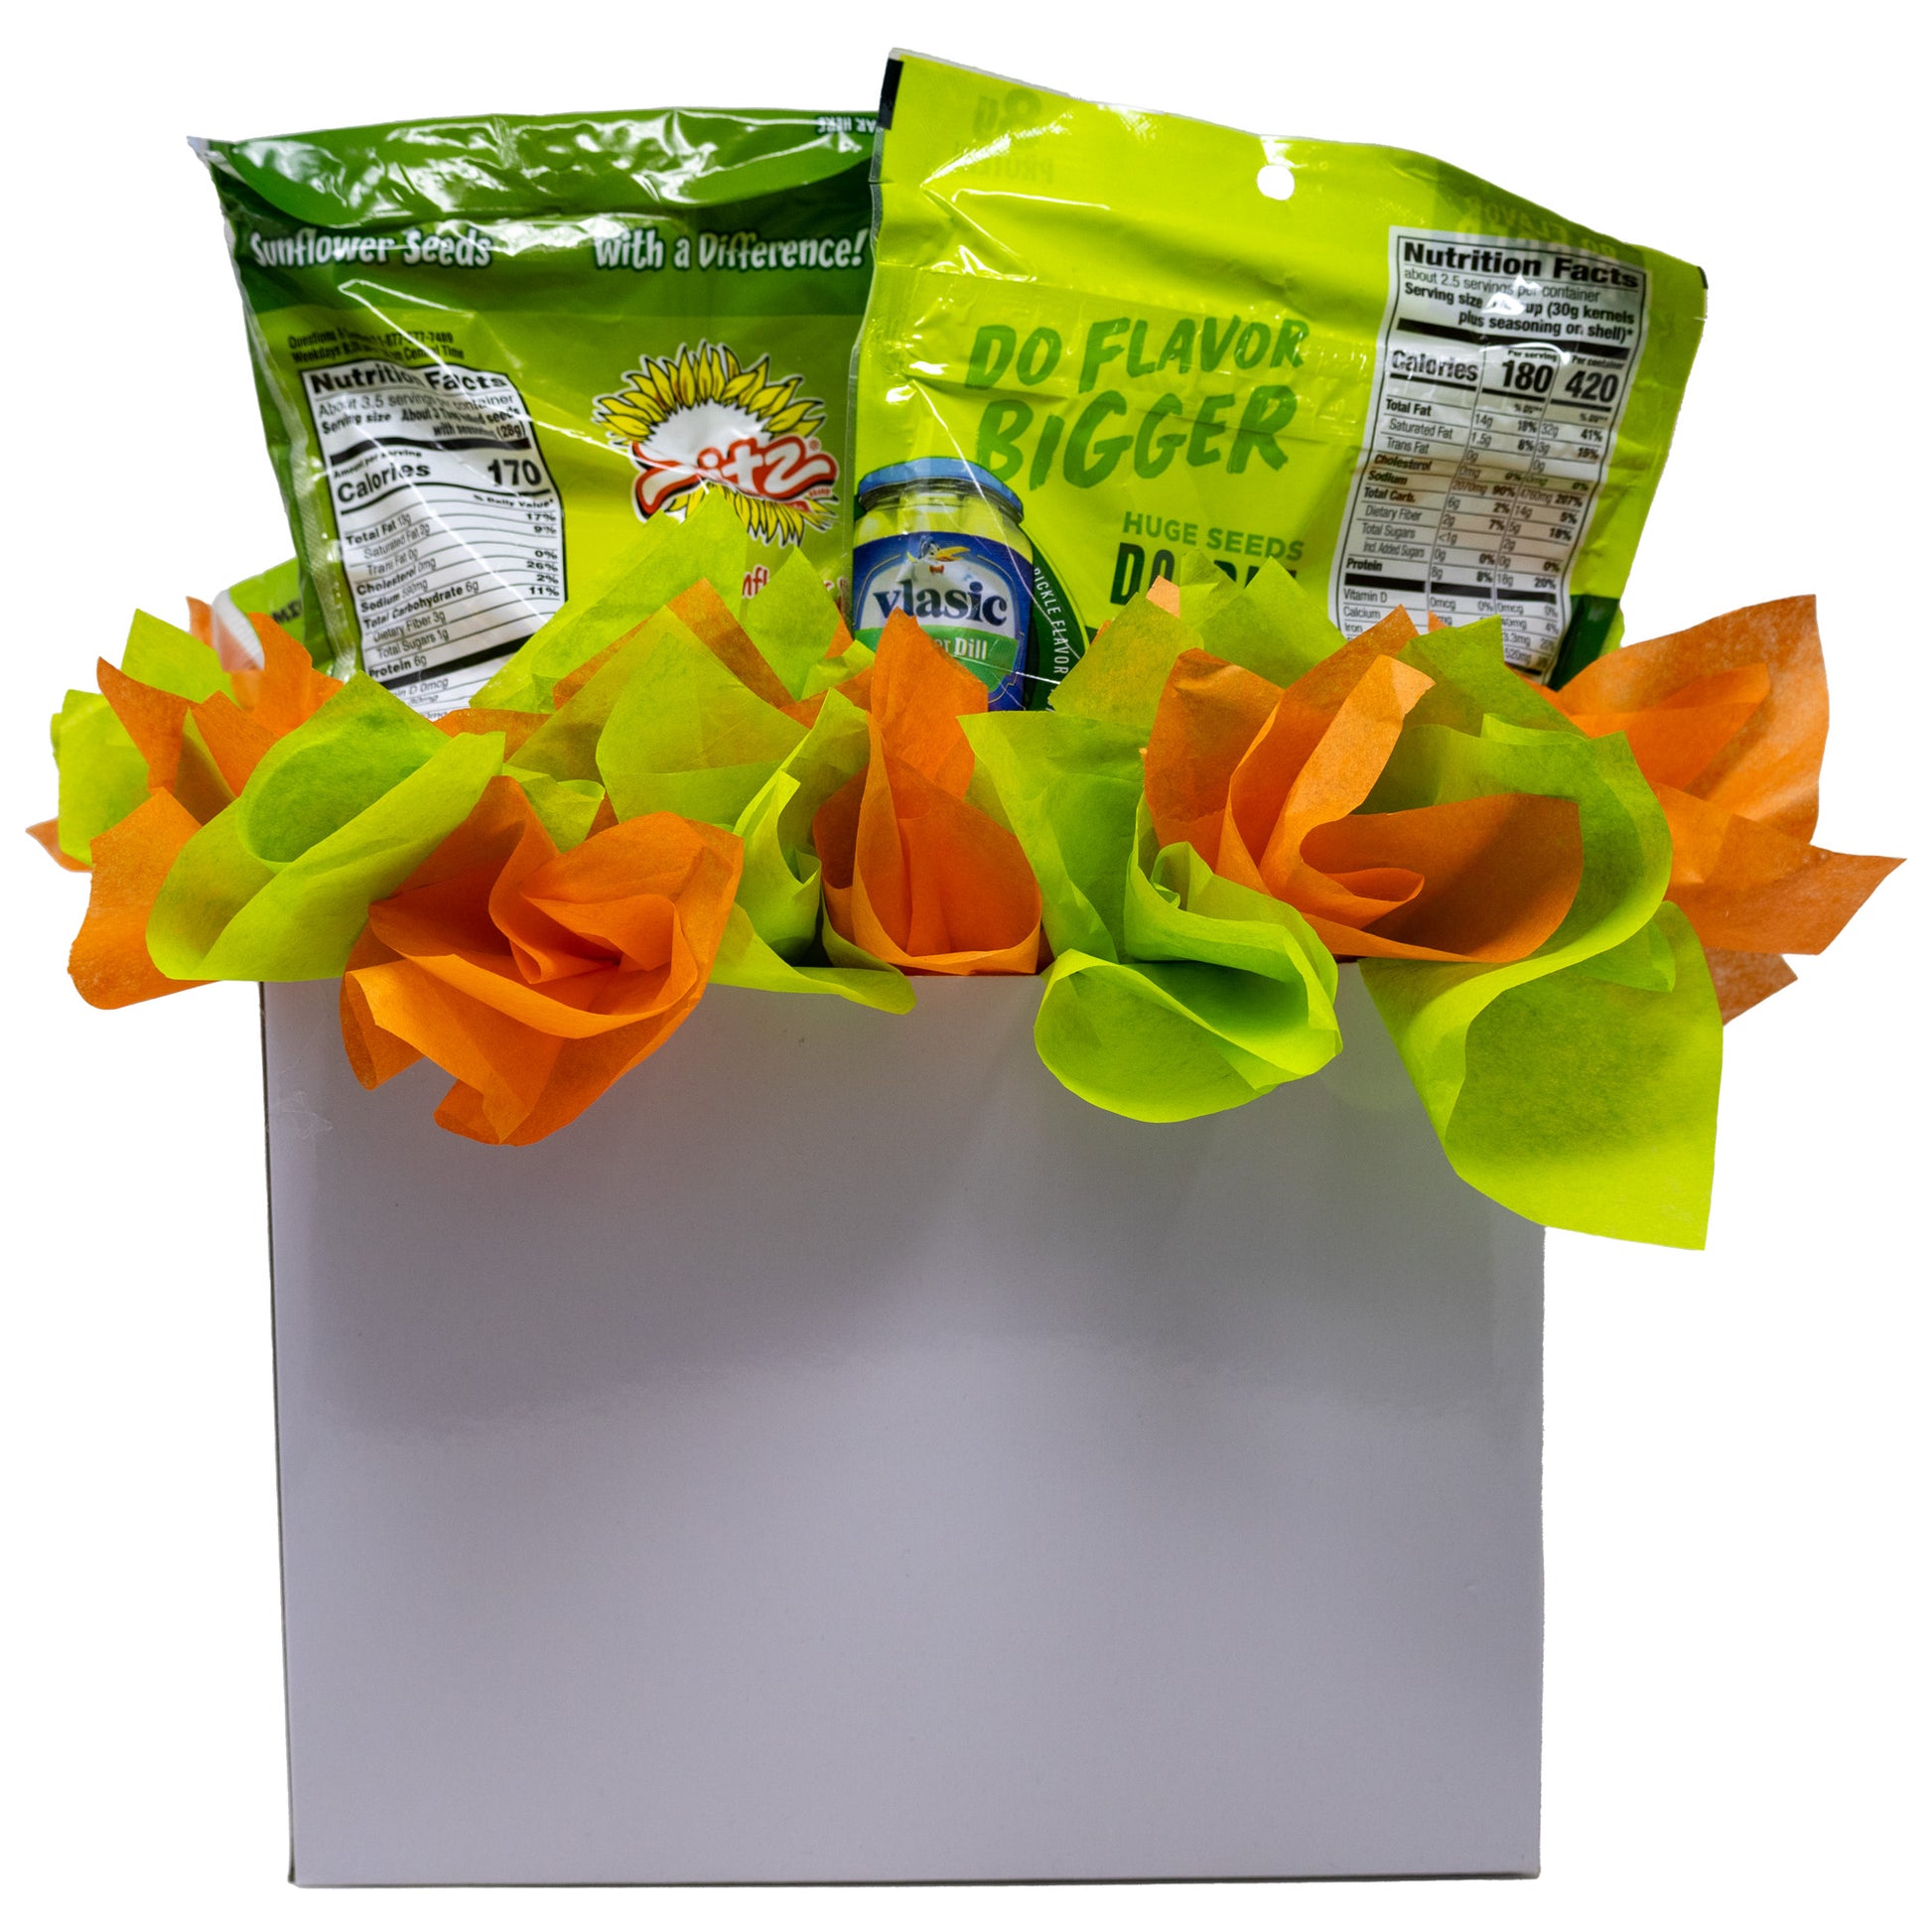 You're Kind Of A Big Dill Appreciation Gift Basket – Powers Handmade Gifts